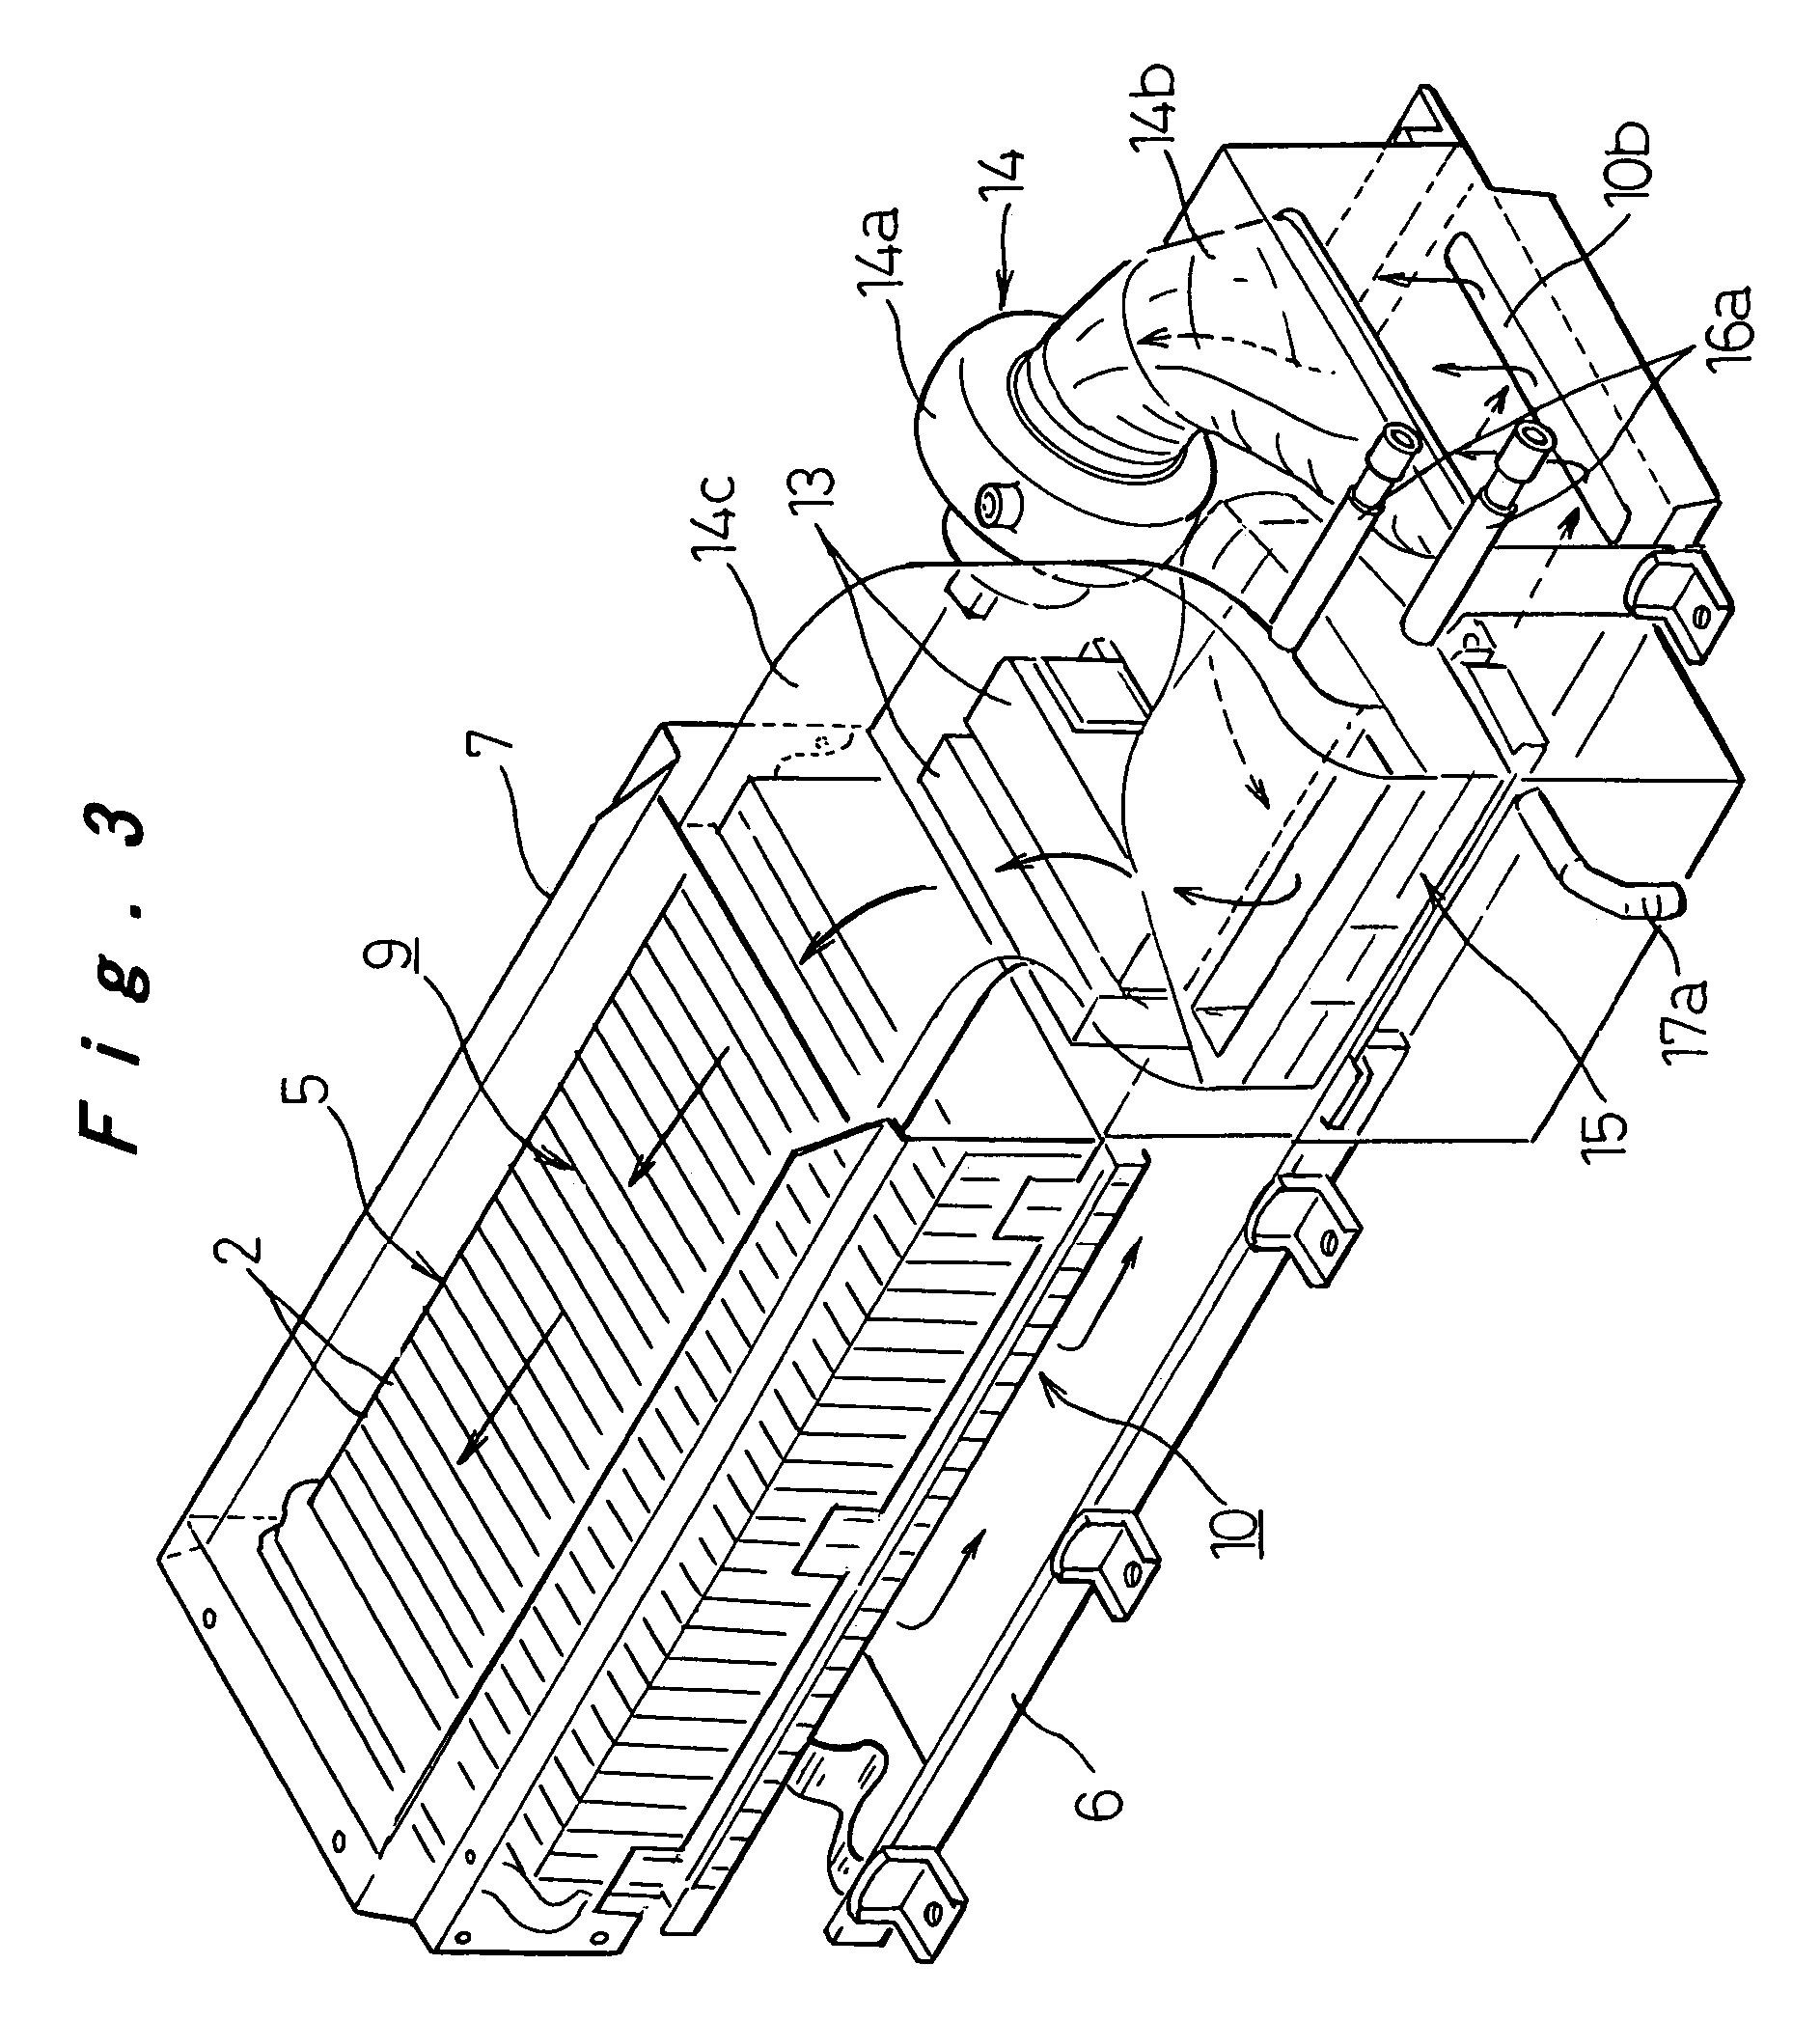 Battery pack apparatus with heat supply and discharge